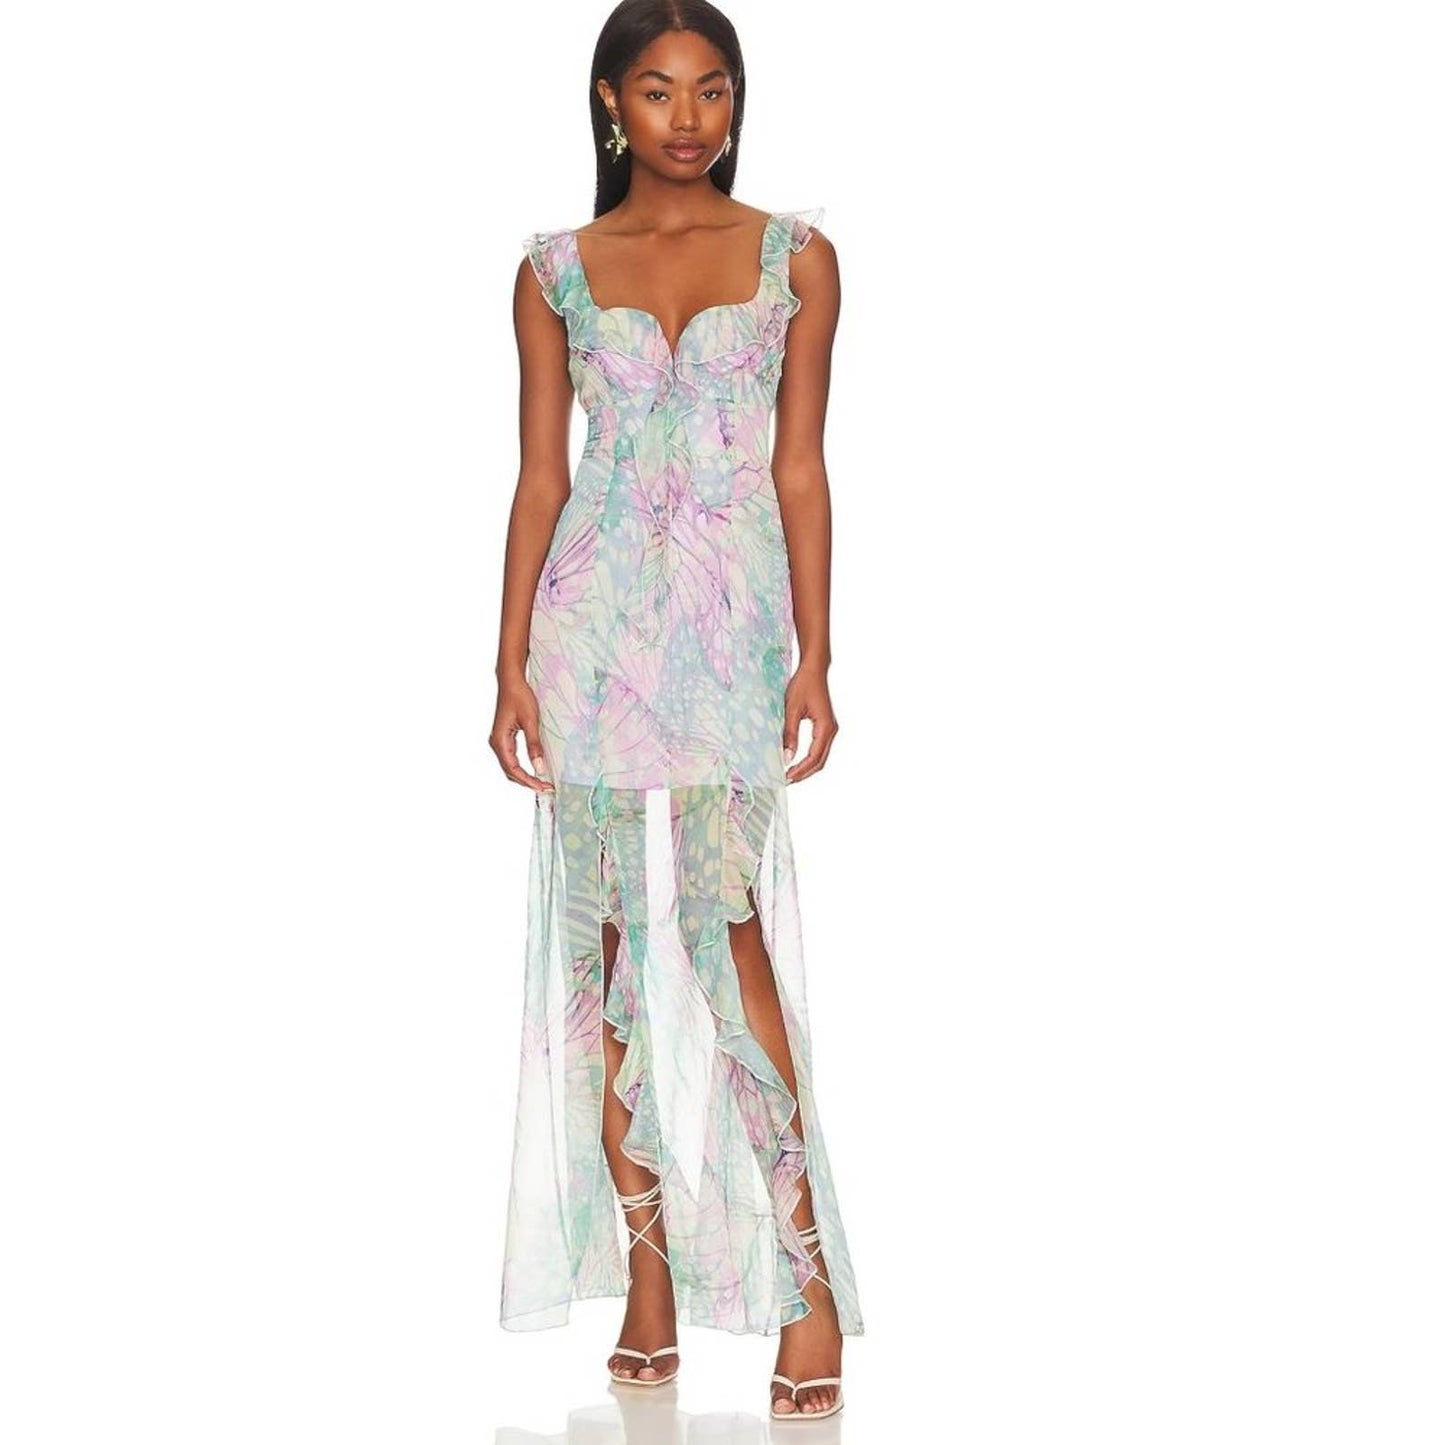 LPA Daniella Flutter Maxi Dress in Pink & Teal Abstract NWT Size Small